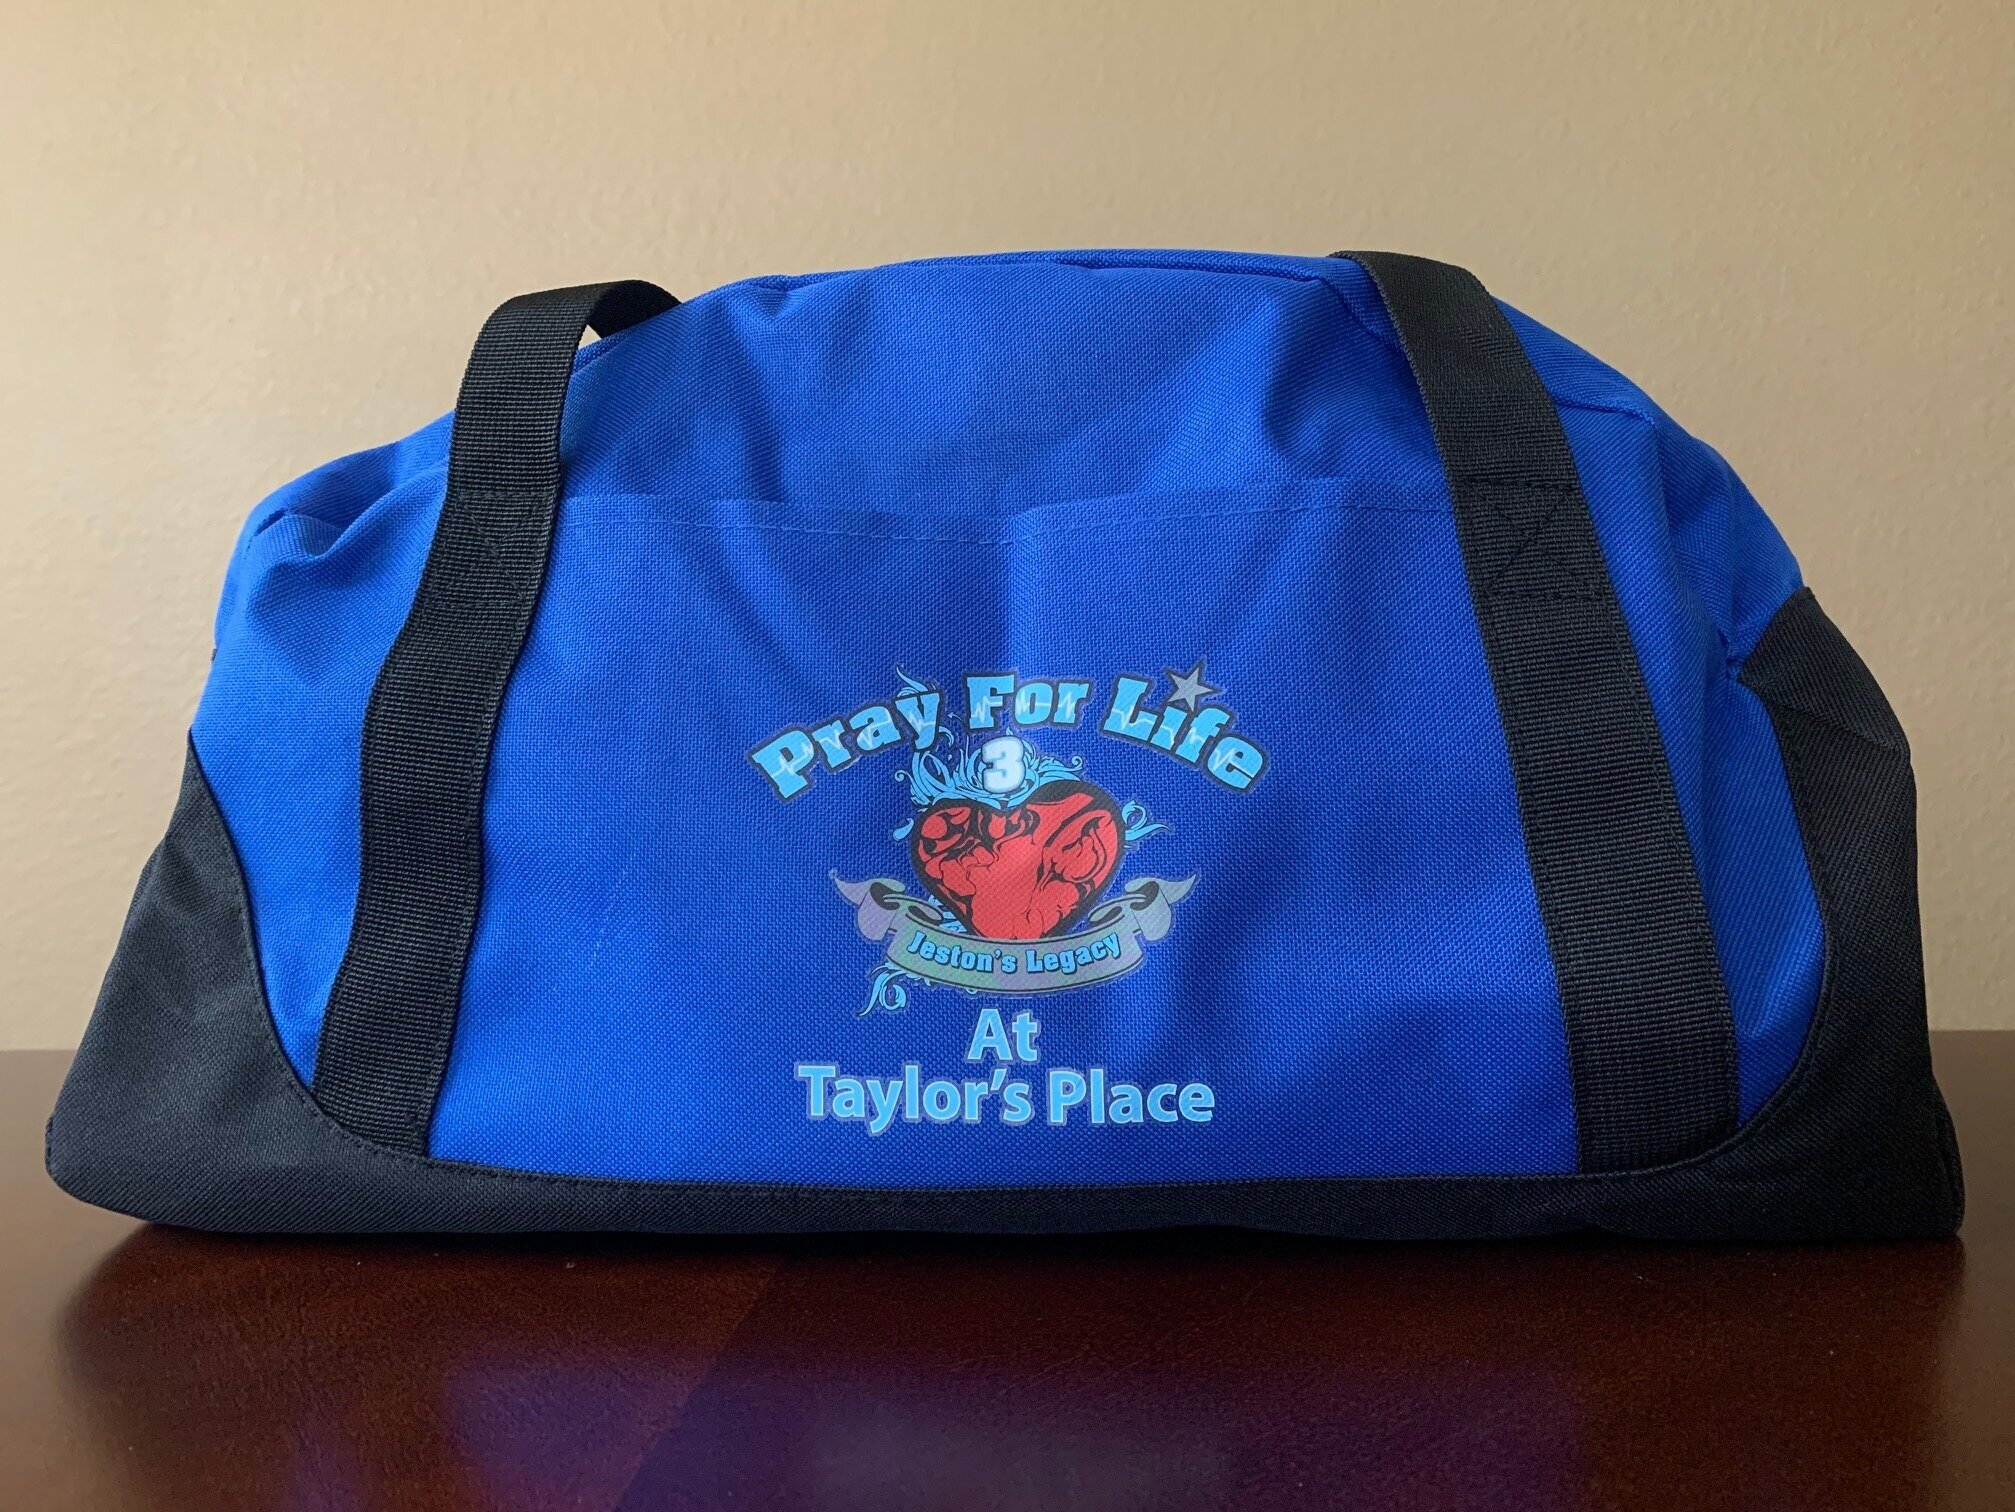  Thank you to Pray for Life Foundation for providing Care Kits to the donor families in Taylor’s Place.  